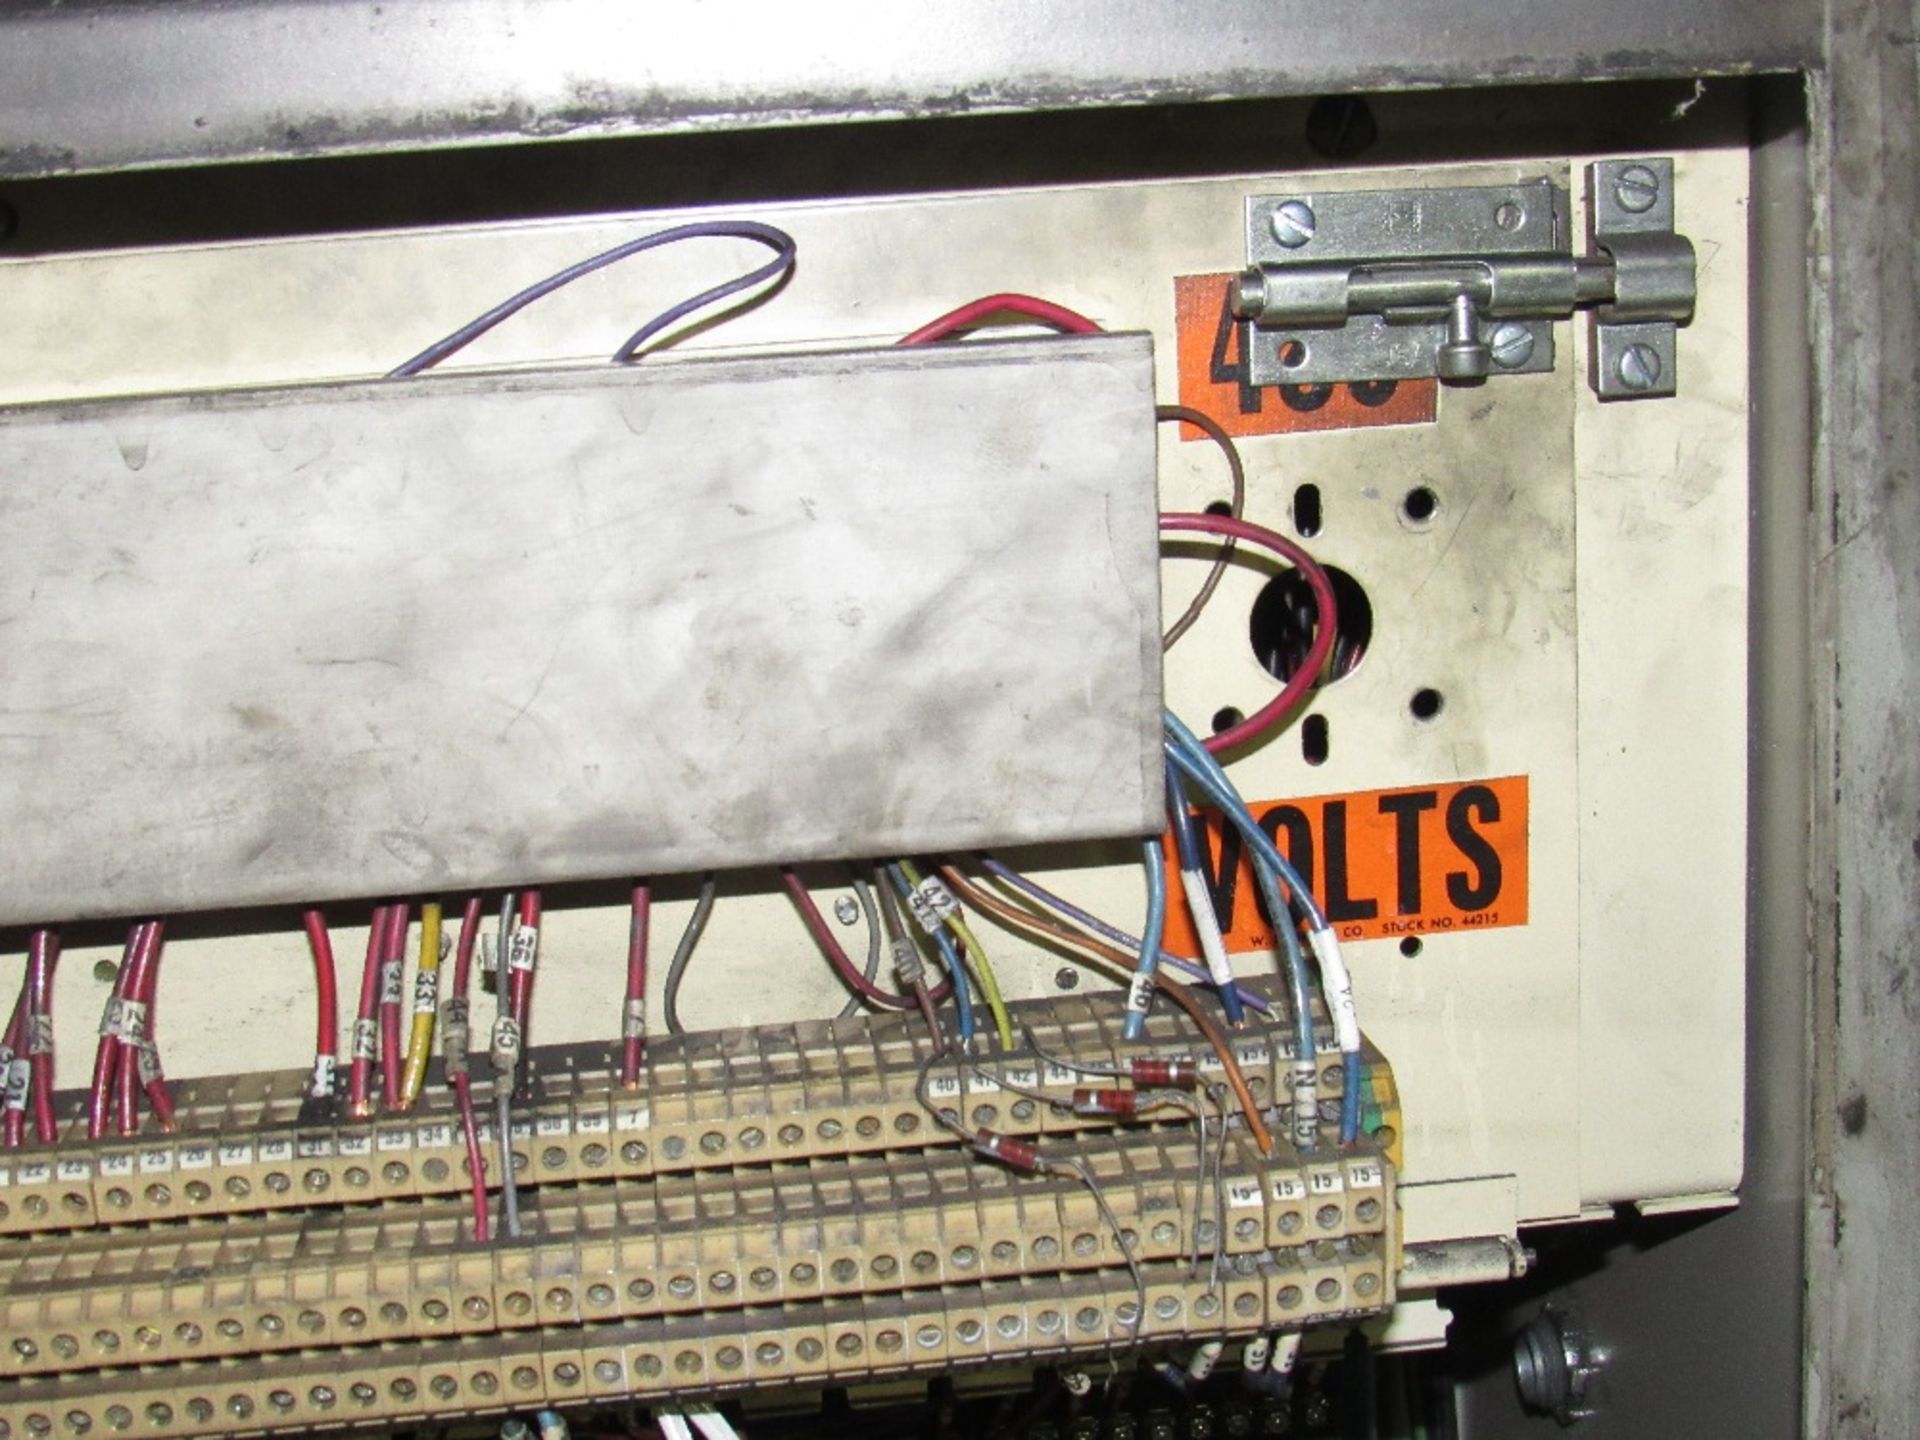 480V Electric Control Box with Misc. controller including VFD, Disconnect, etc. -- (RIGGING INCLUDED - Image 11 of 36